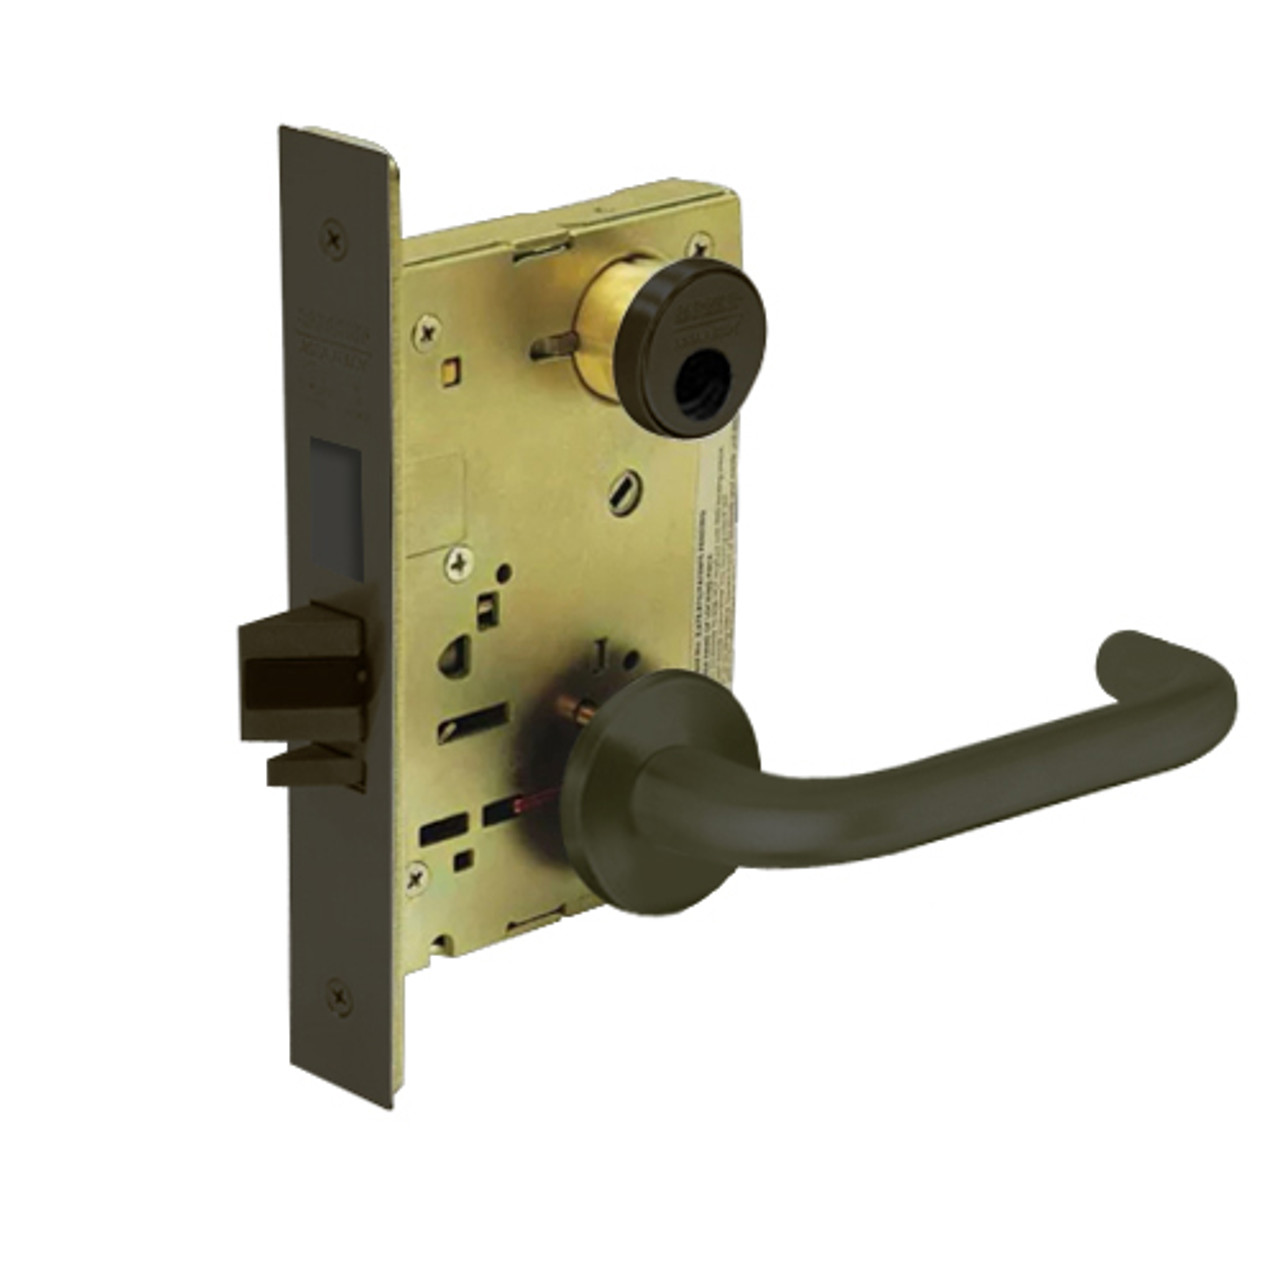 LC-8251-LNJ-10B Sargent 8200 Series Storeroom Deadbolt Mortise Lock with LNJ Lever Trim and Deadbolt Less Cylinder in Oxidized Dull Bronze